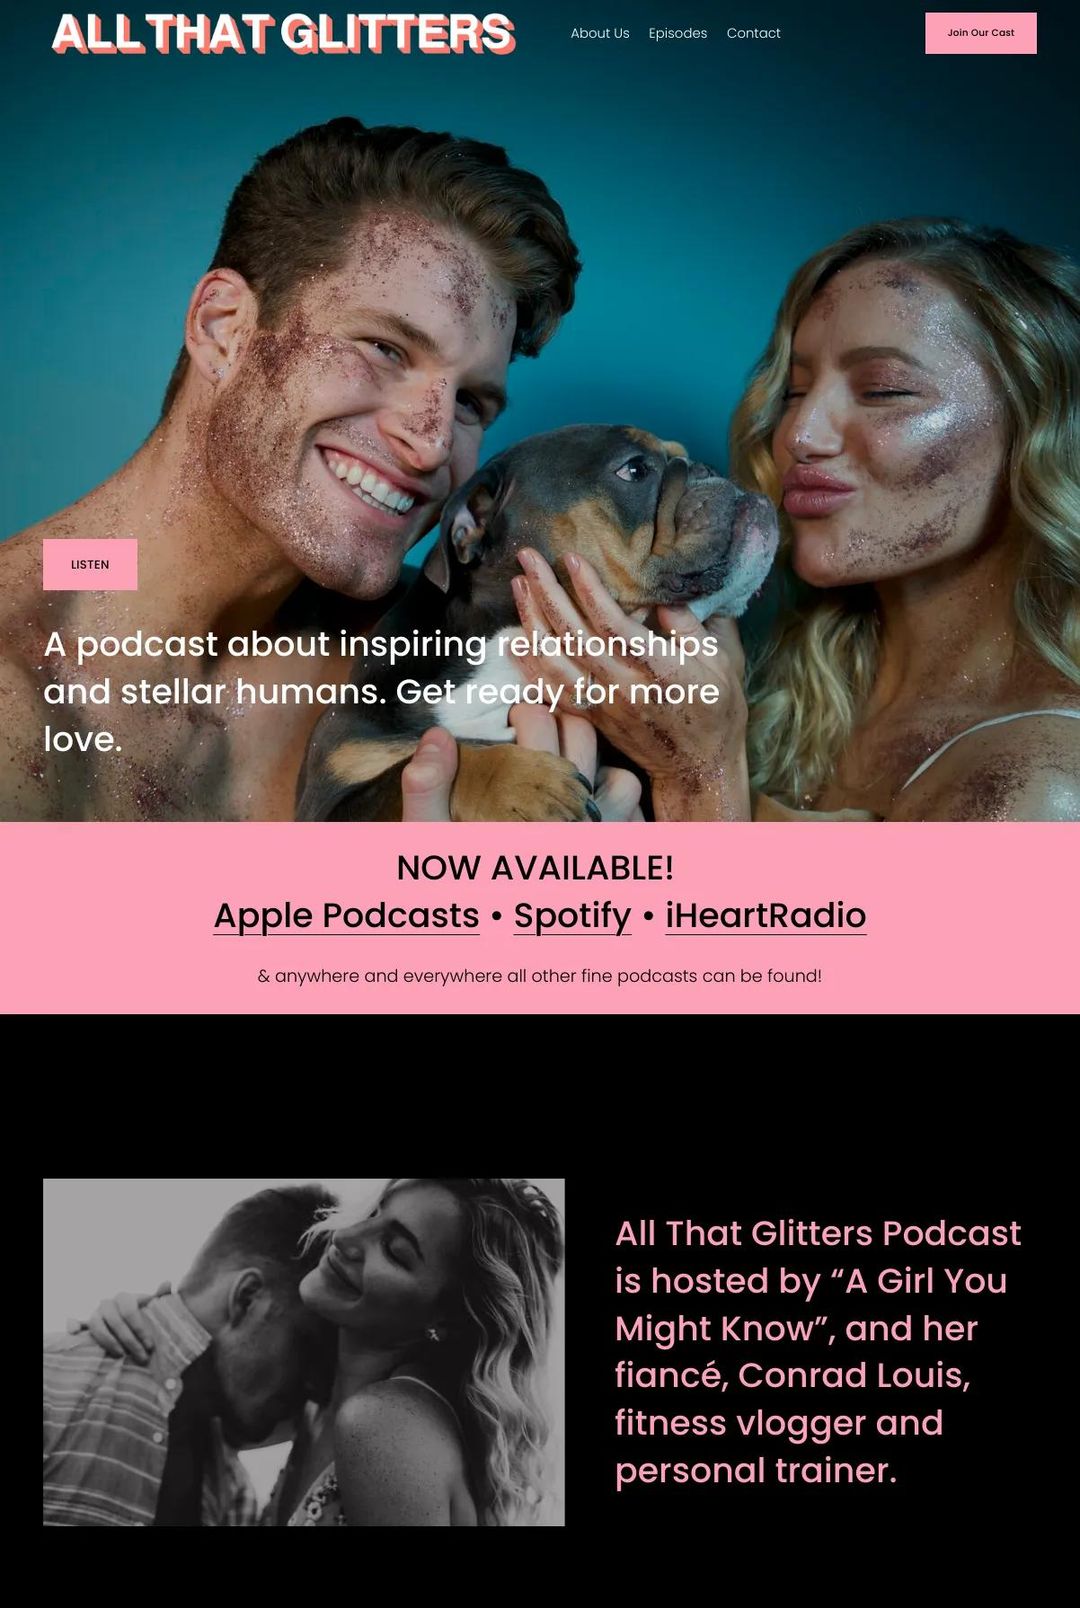 Screenshot 1 of All that Glitters (Example Squarespace Podcast Website)